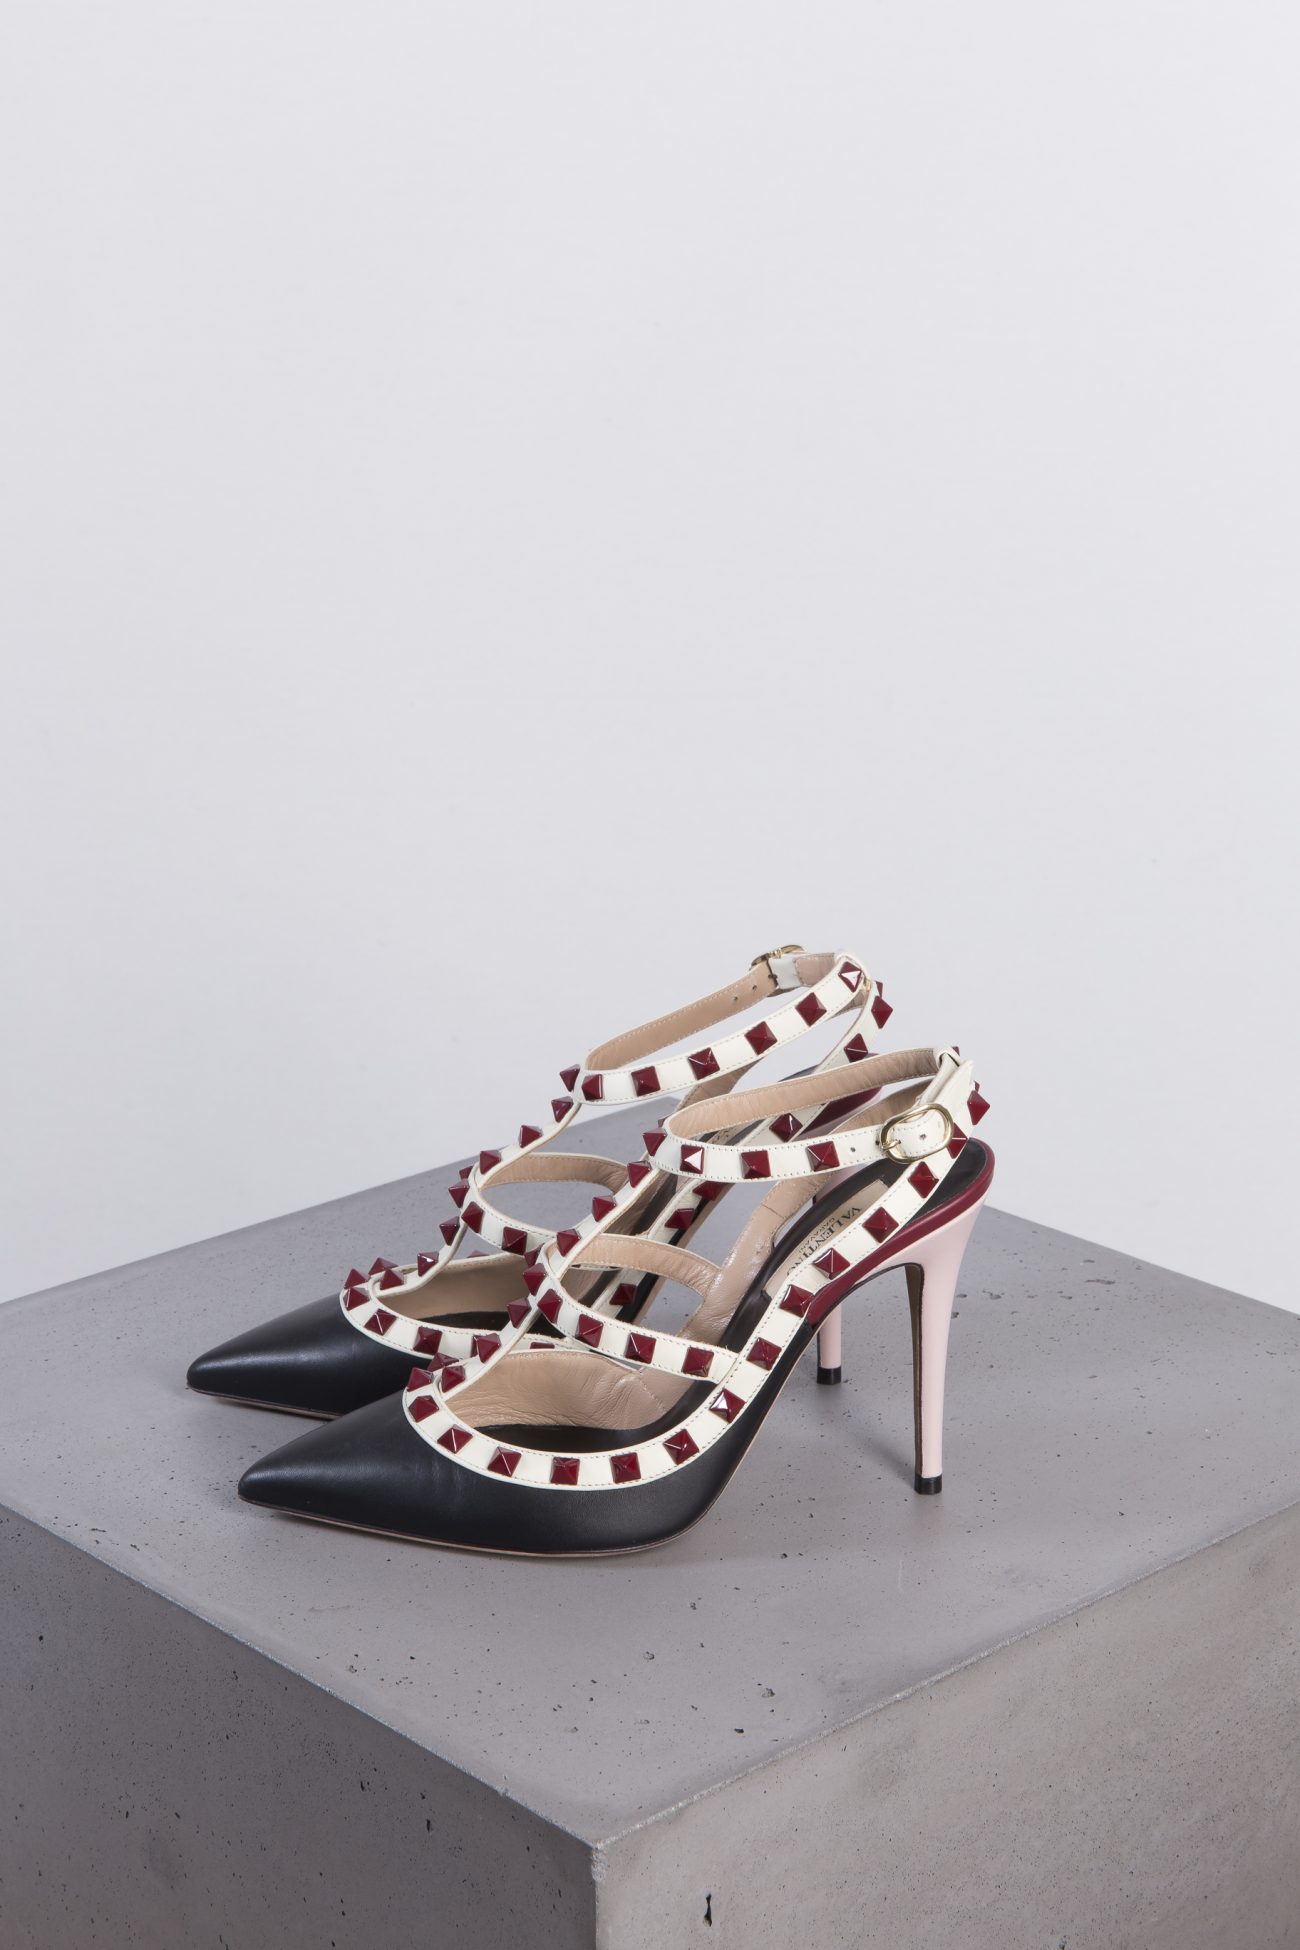 Valentino Shoes, 37 - Online Consignment Boutique